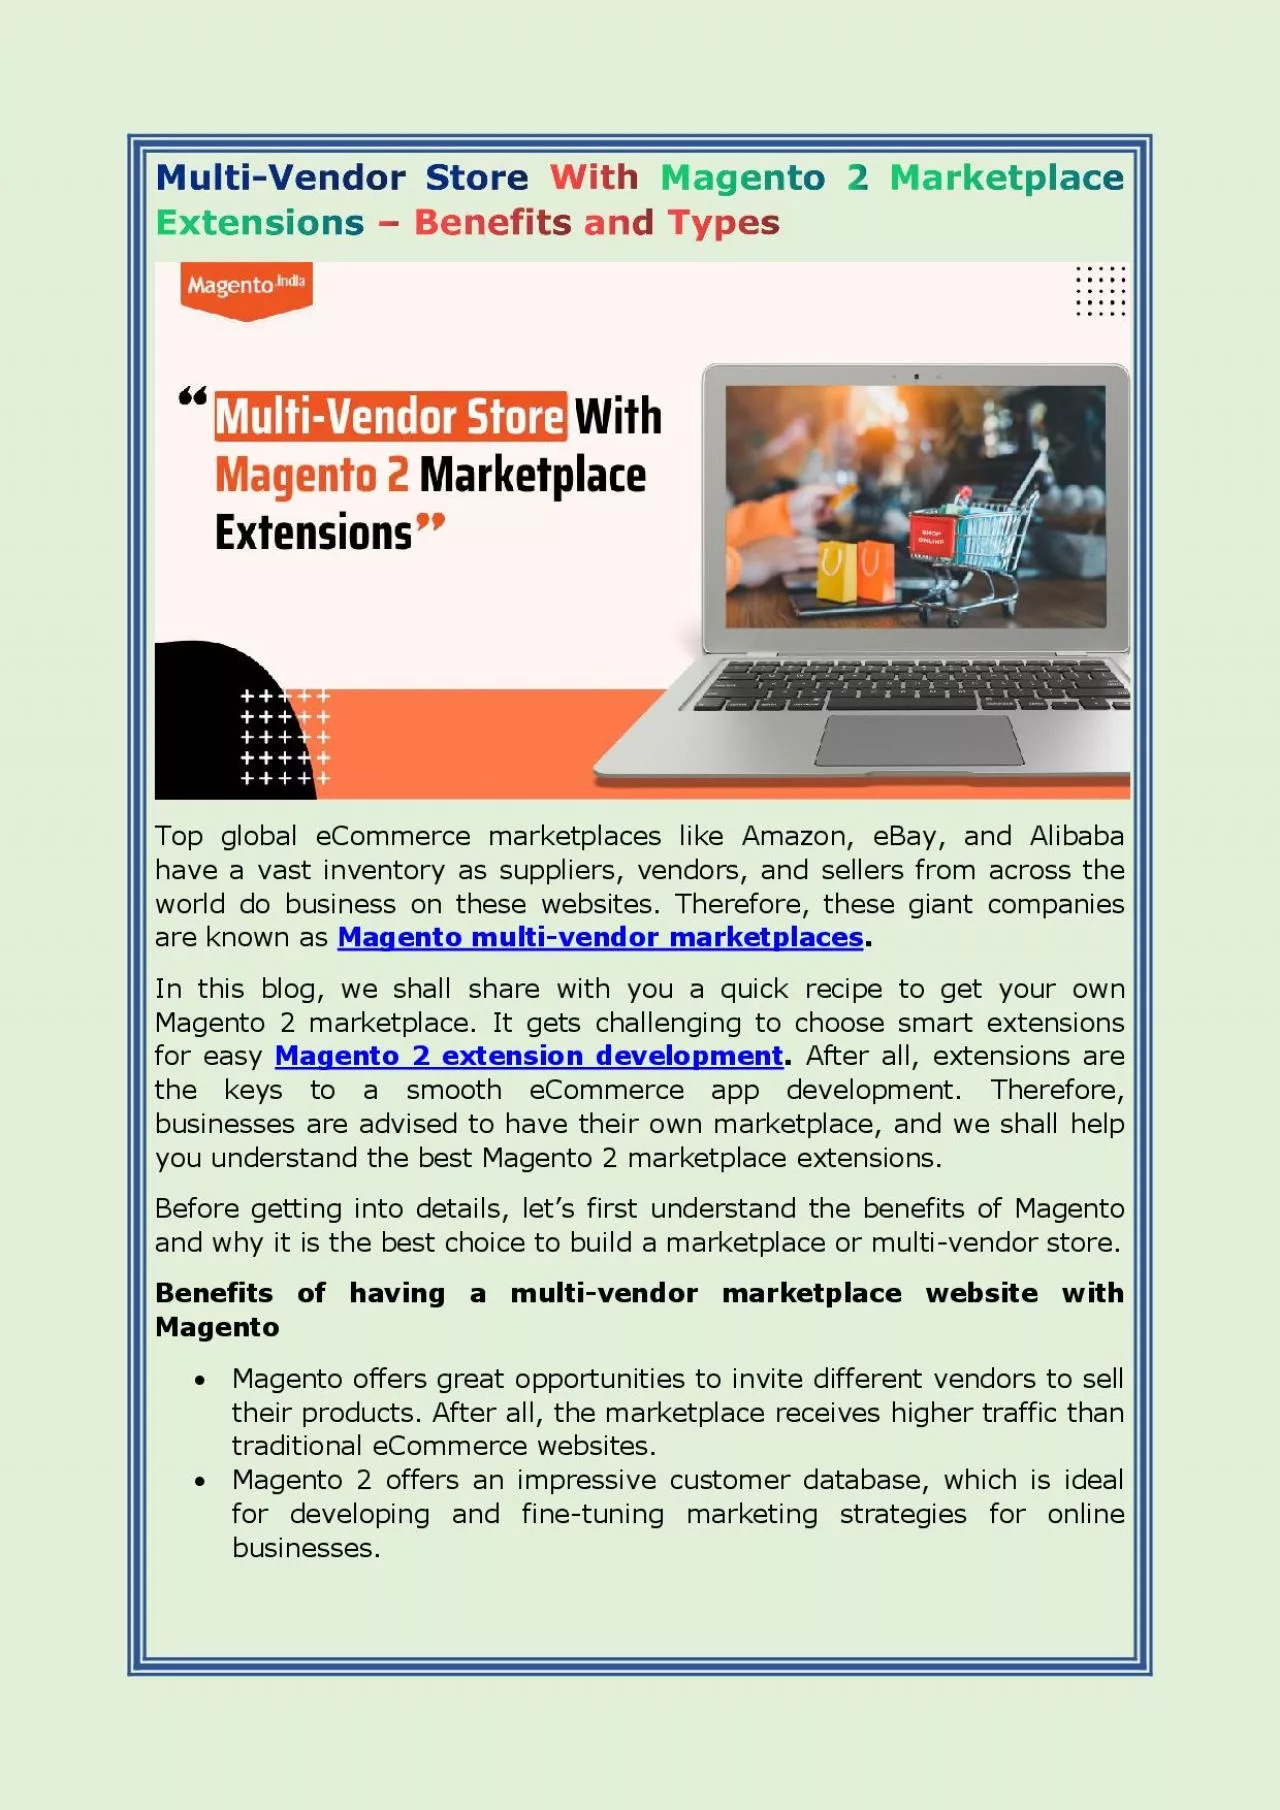 Multi-Vendor Store With Magento 2 Marketplace Extensions – Benefits and Types